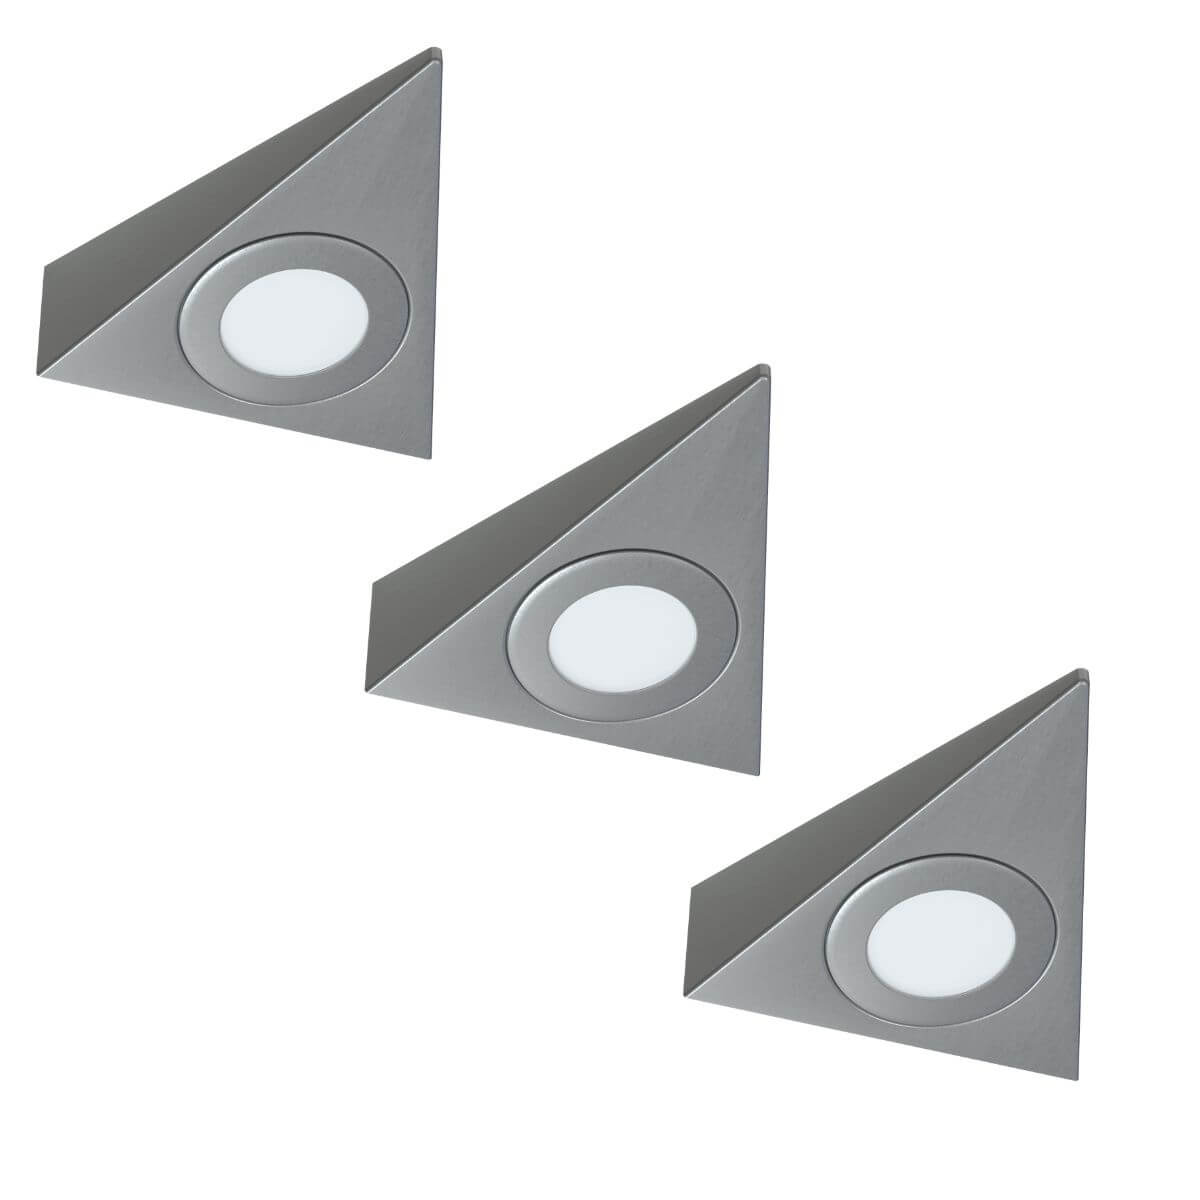 View 3 Pack Of High Brightness Triangle LED Under Cabinet Lights With a 8w Driver information